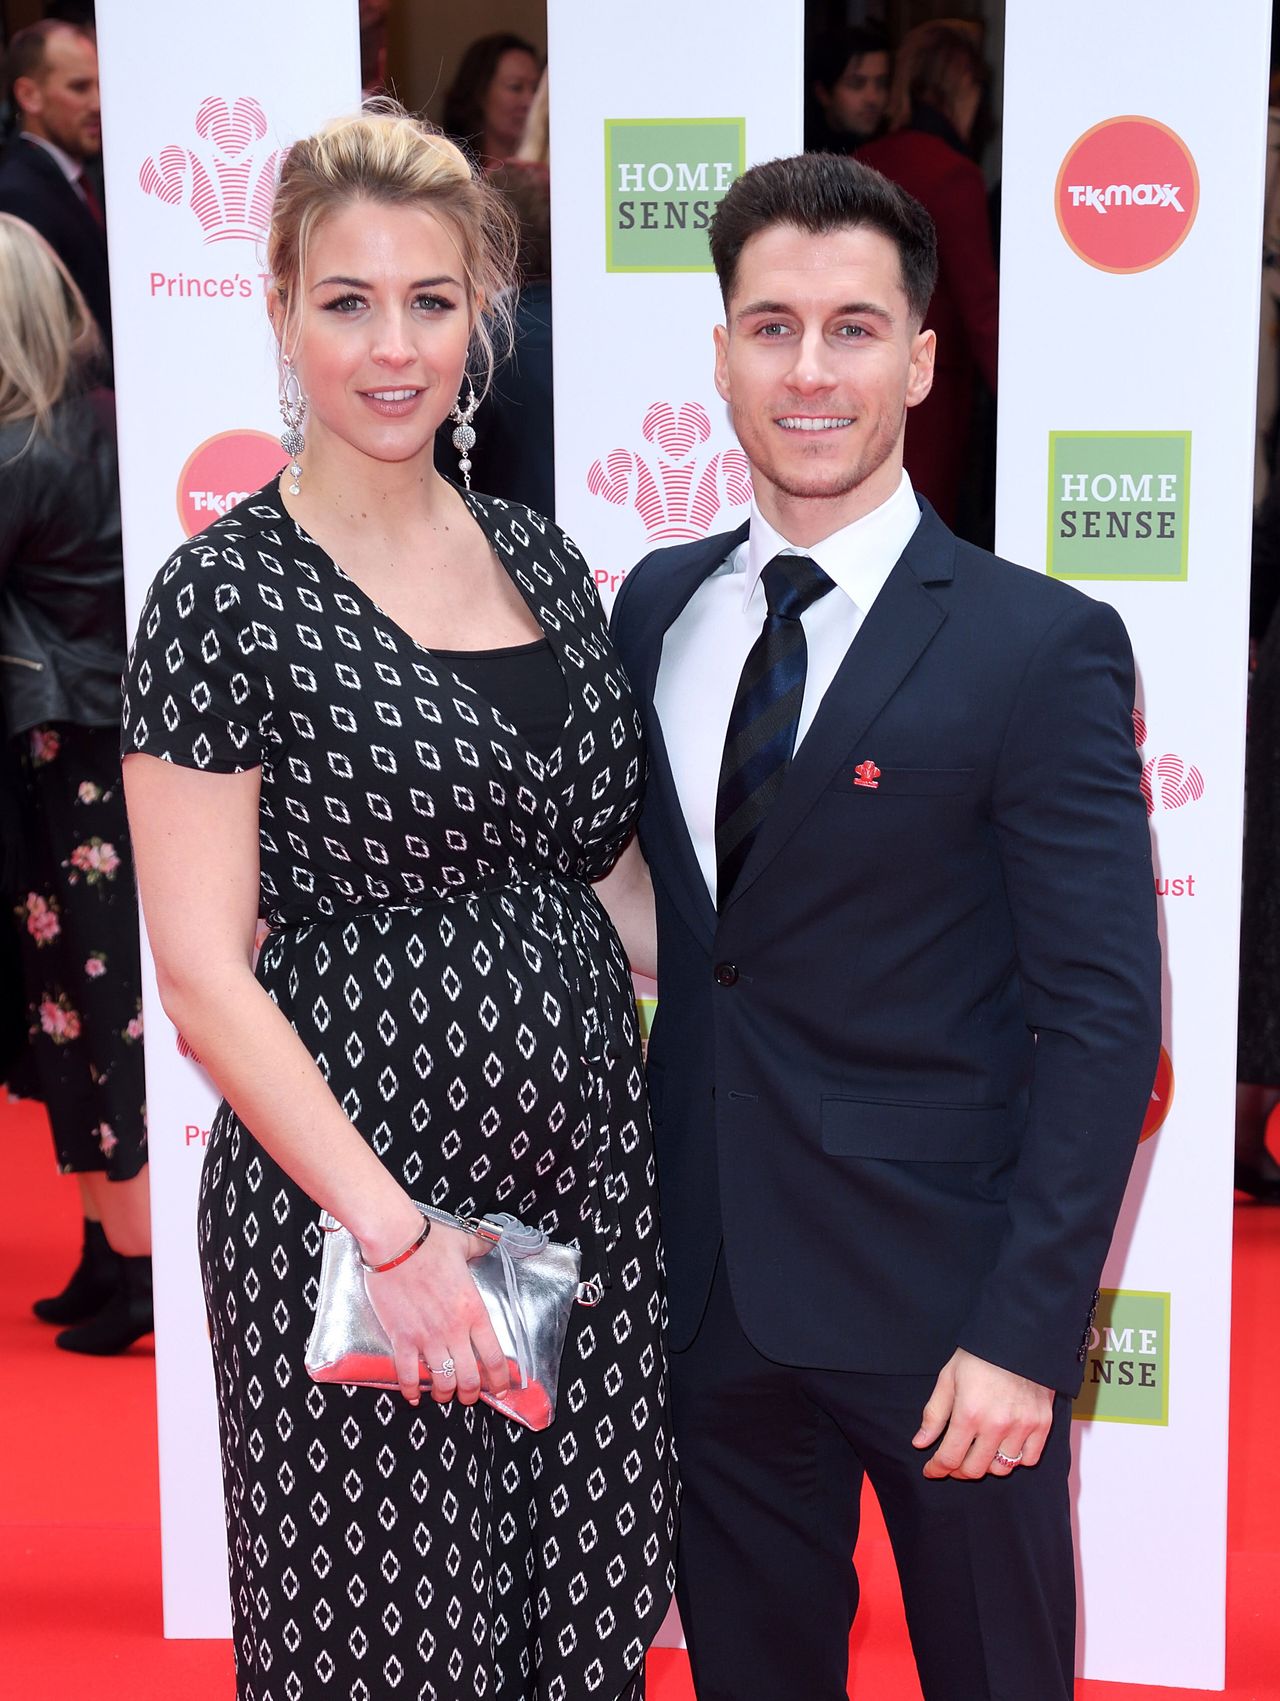 Gemma Atkinson and Gorka Marquez got together after meeting on Strictly in 2017 and now have a daughter together